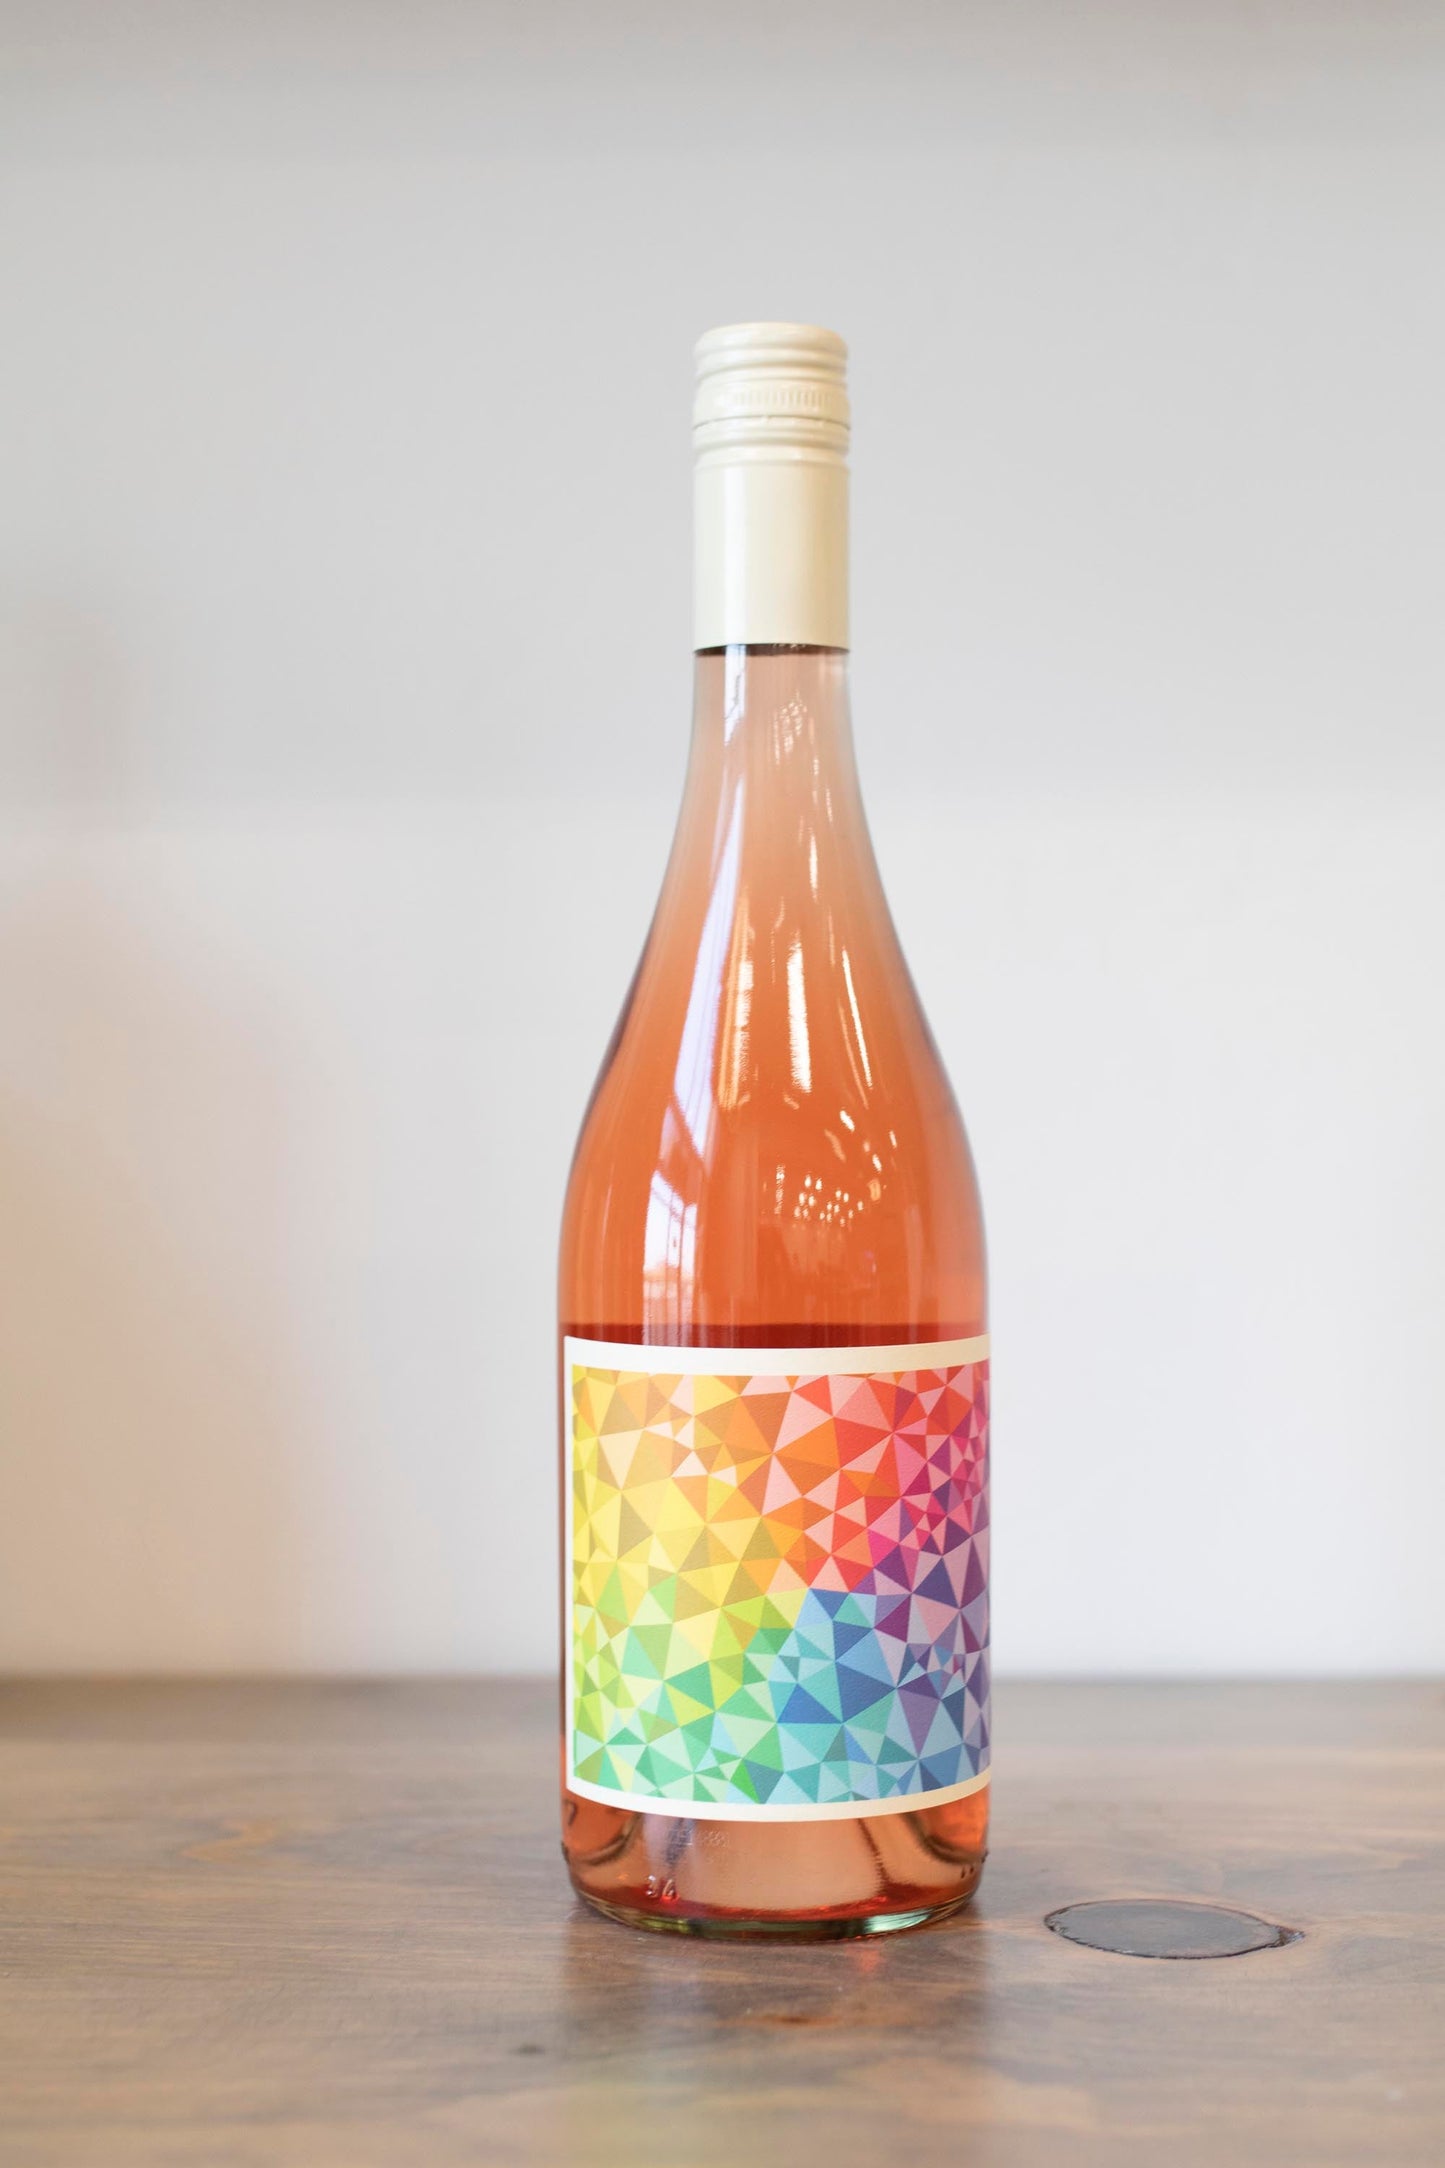 Bottle of Prisma Rose found at Vine & Board in 3809 NW 166th St Suite 1, Edmond, OK 73012